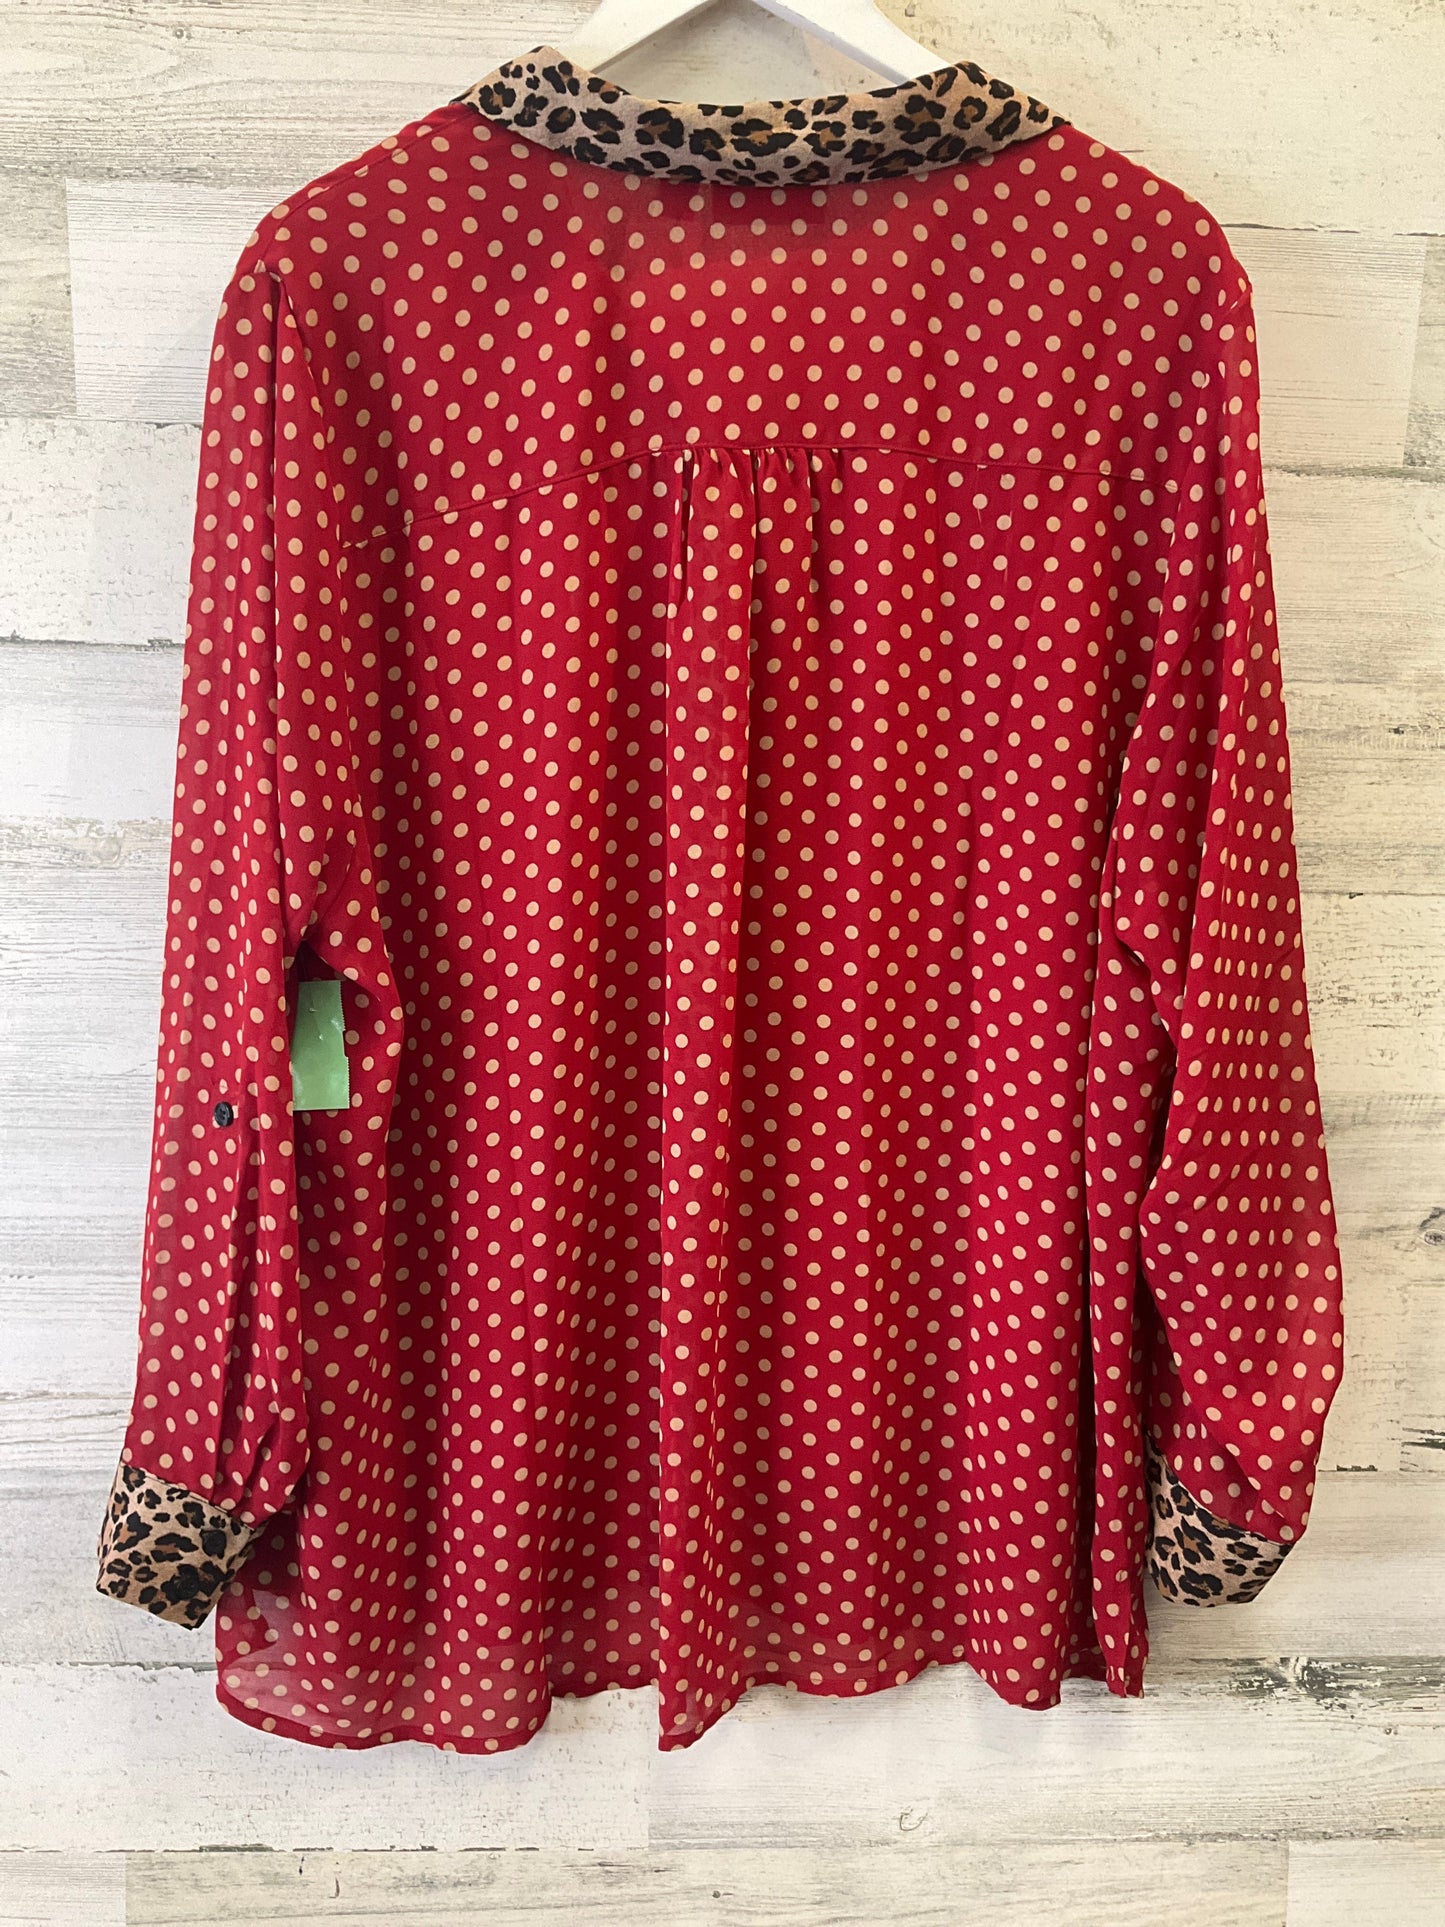 Red & Tan Blouse Long Sleeve Belle By Kim Gravel, Size 2x